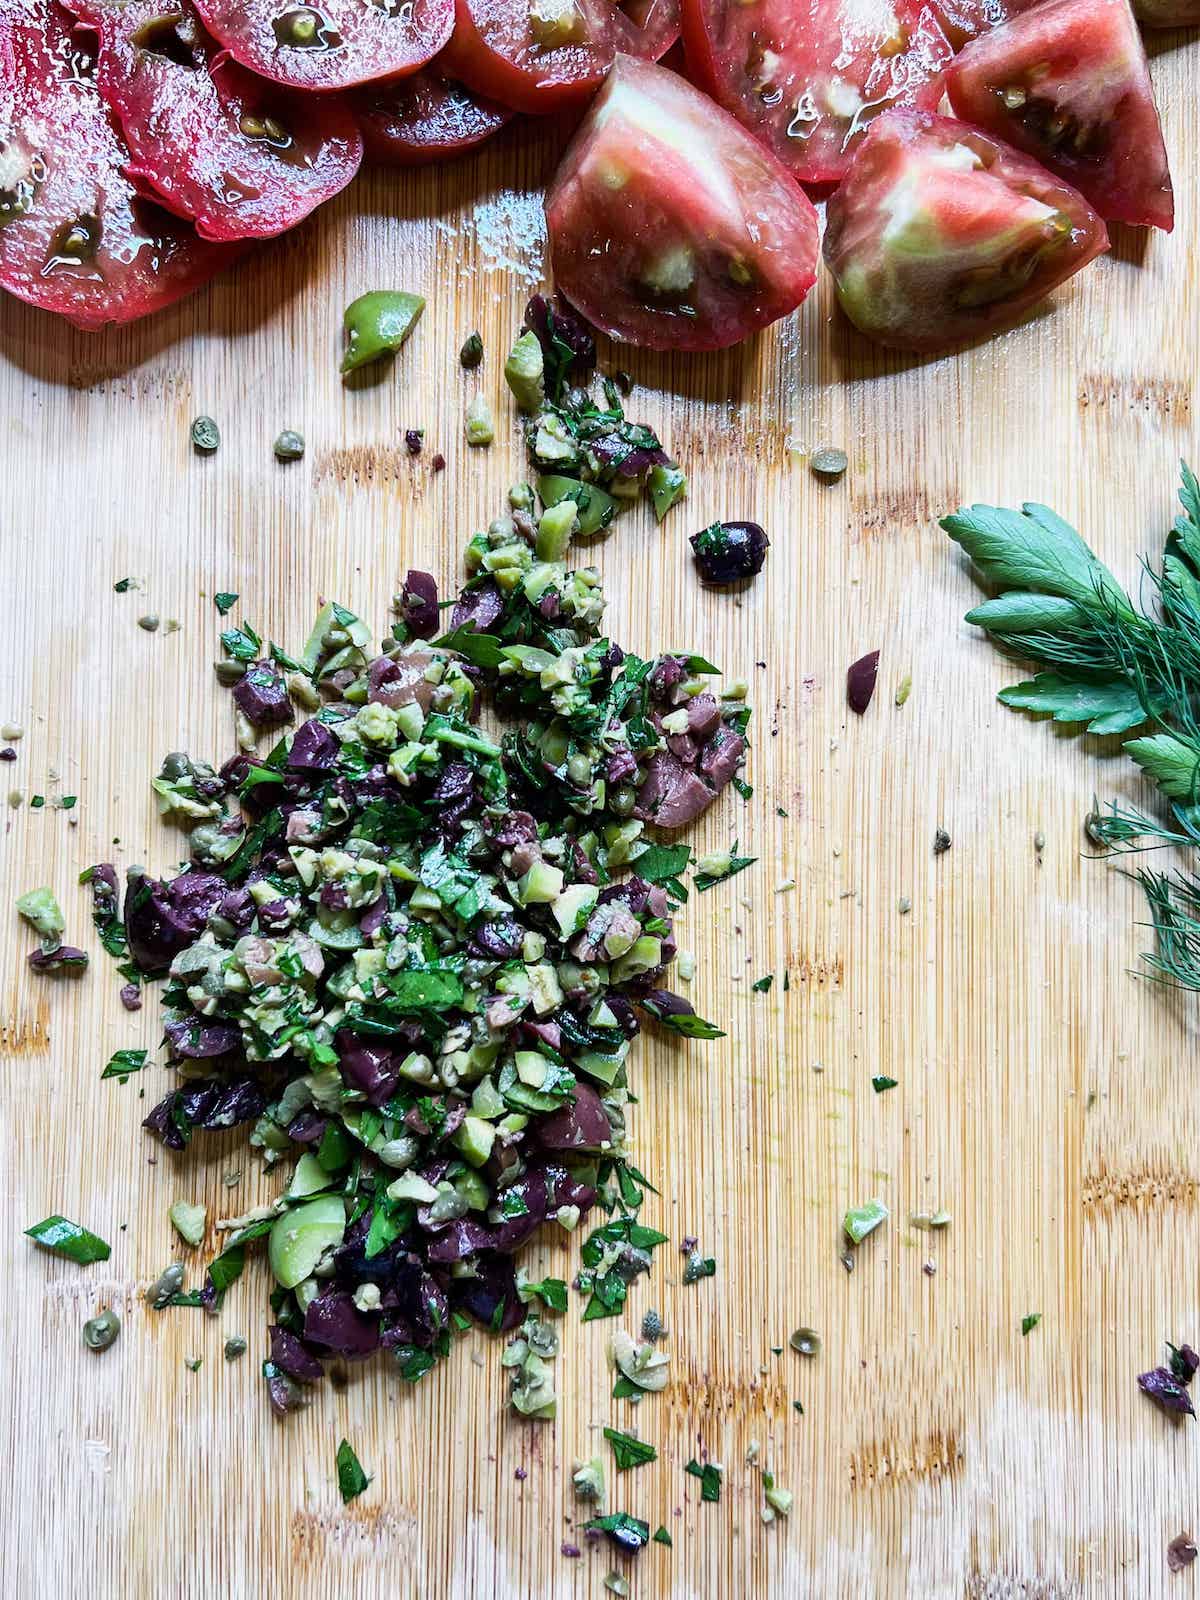 Chopped olives, capers and parsley on a wood cutting board.